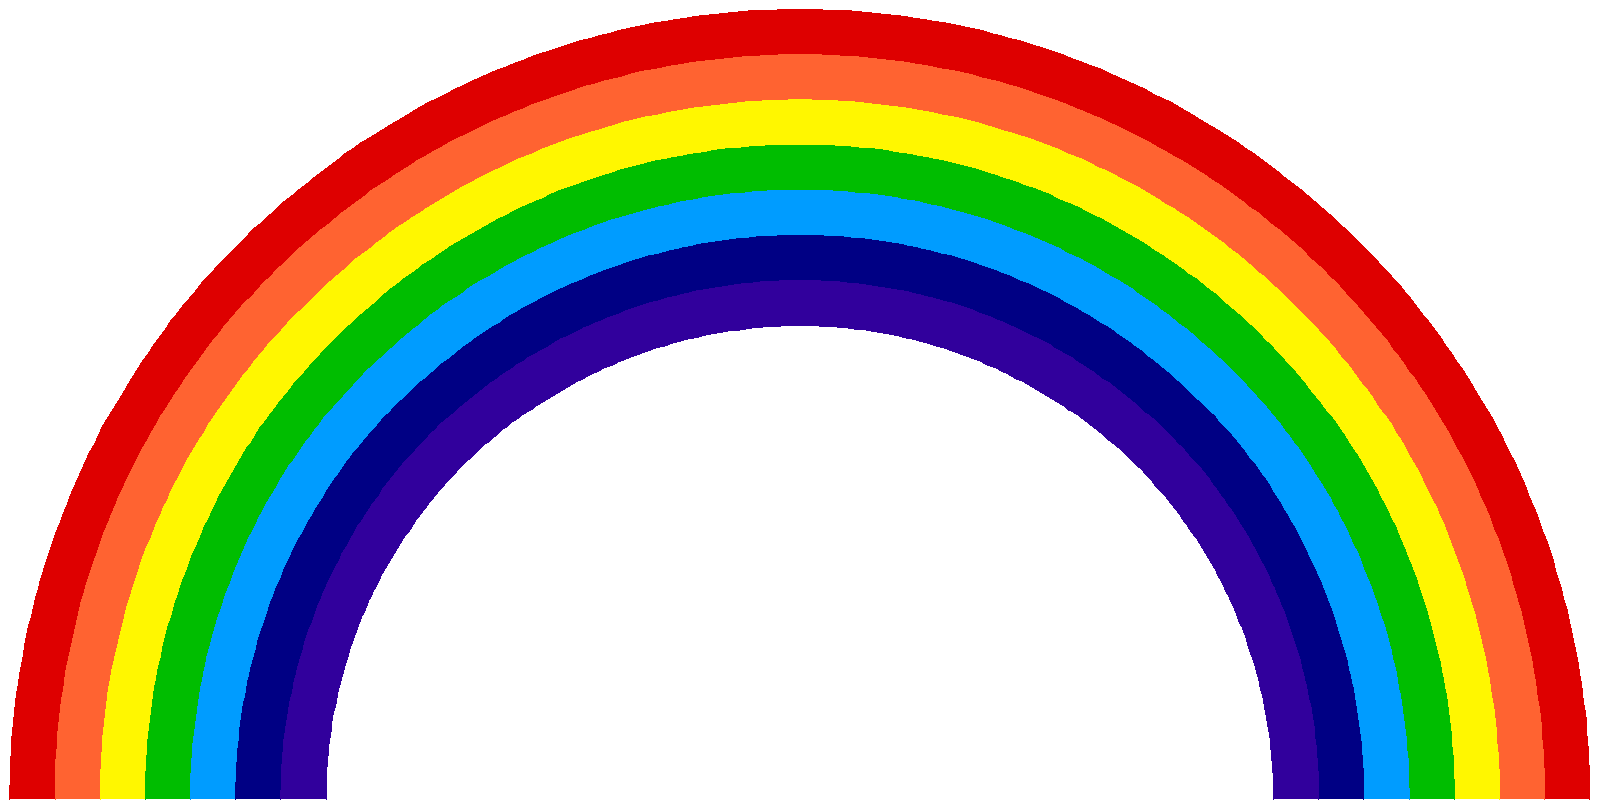 free clipart images rainbow - photo #25